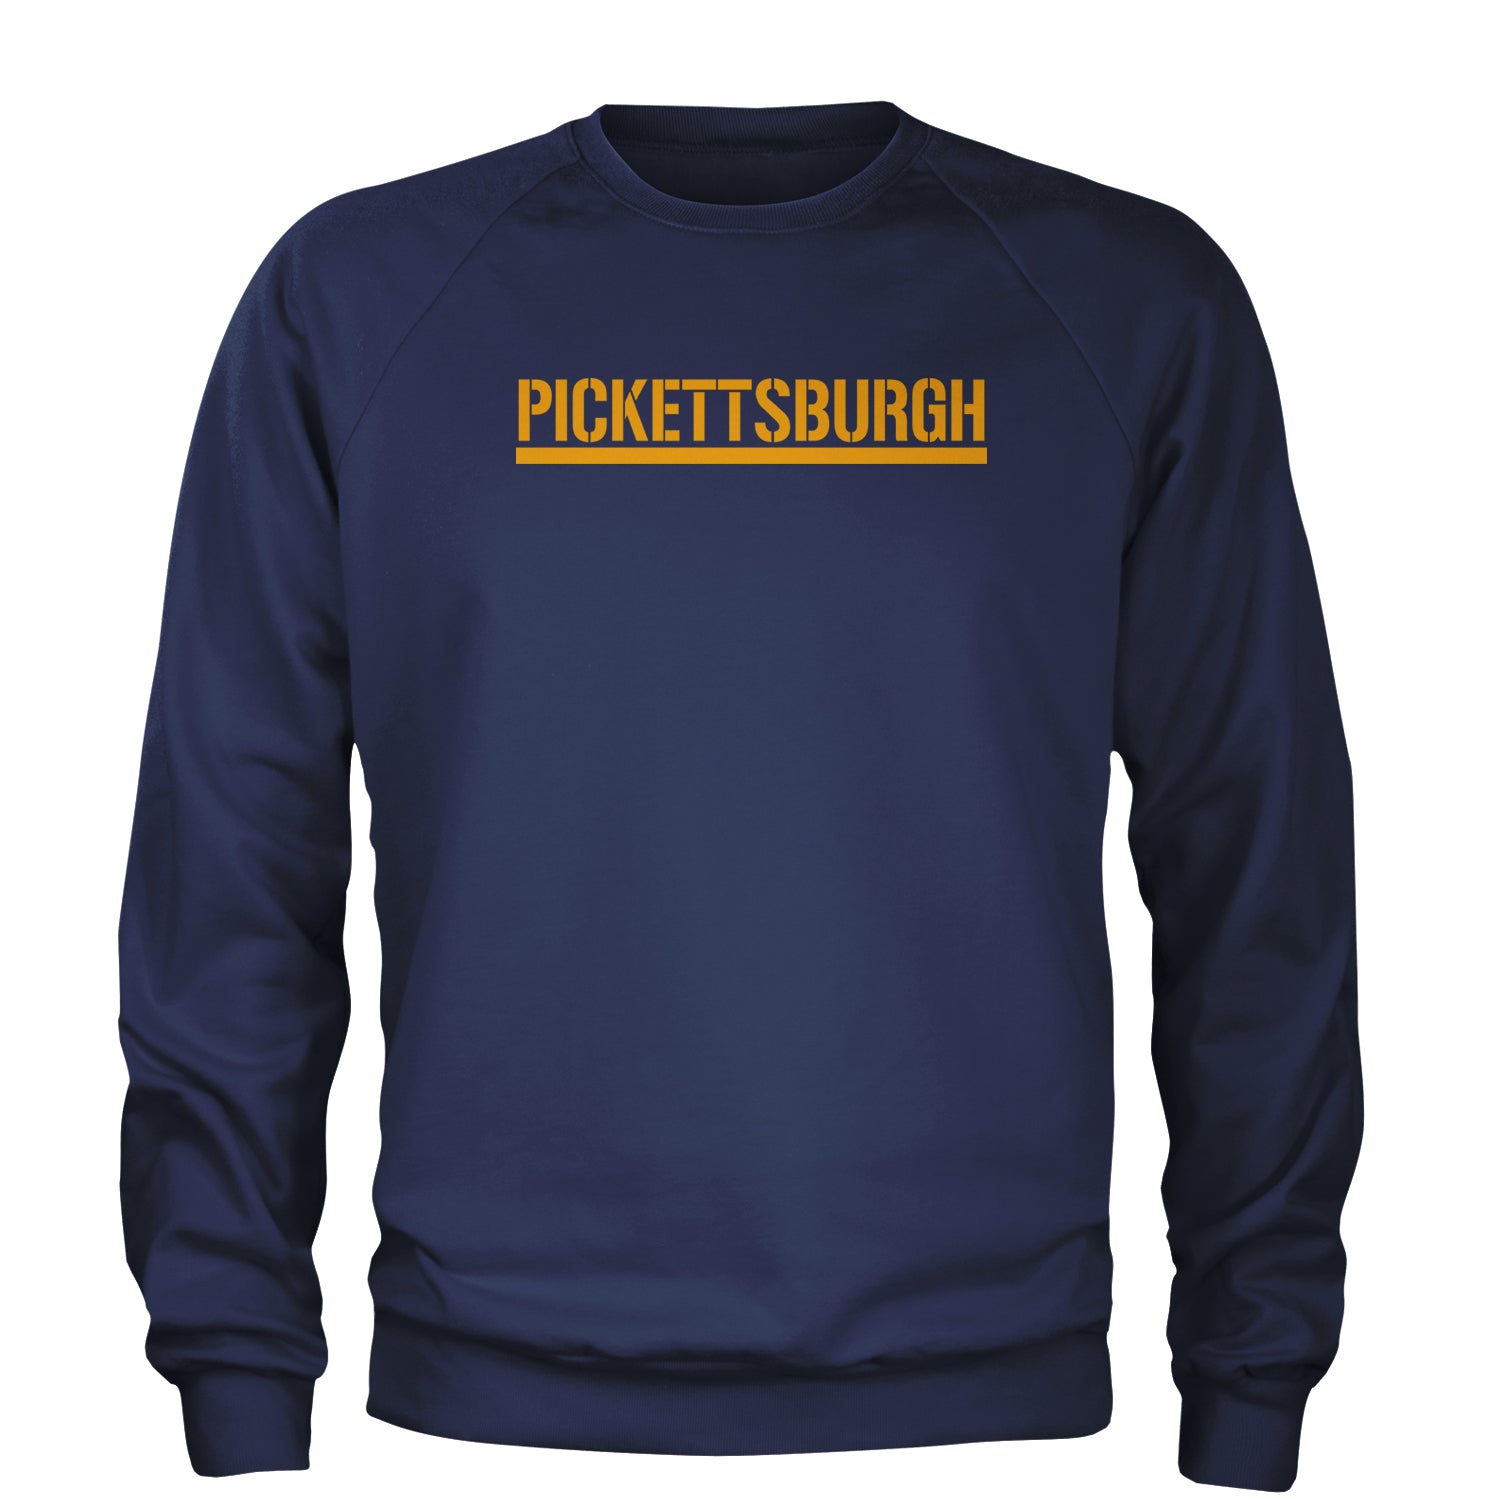 Pickettsburgh Pittsburgh Football Adult Crewneck Sweatshirt apparel, city, clothing, curtain, football, iron, jersey, nation, pennsylvania, steel, steeler by Expression Tees